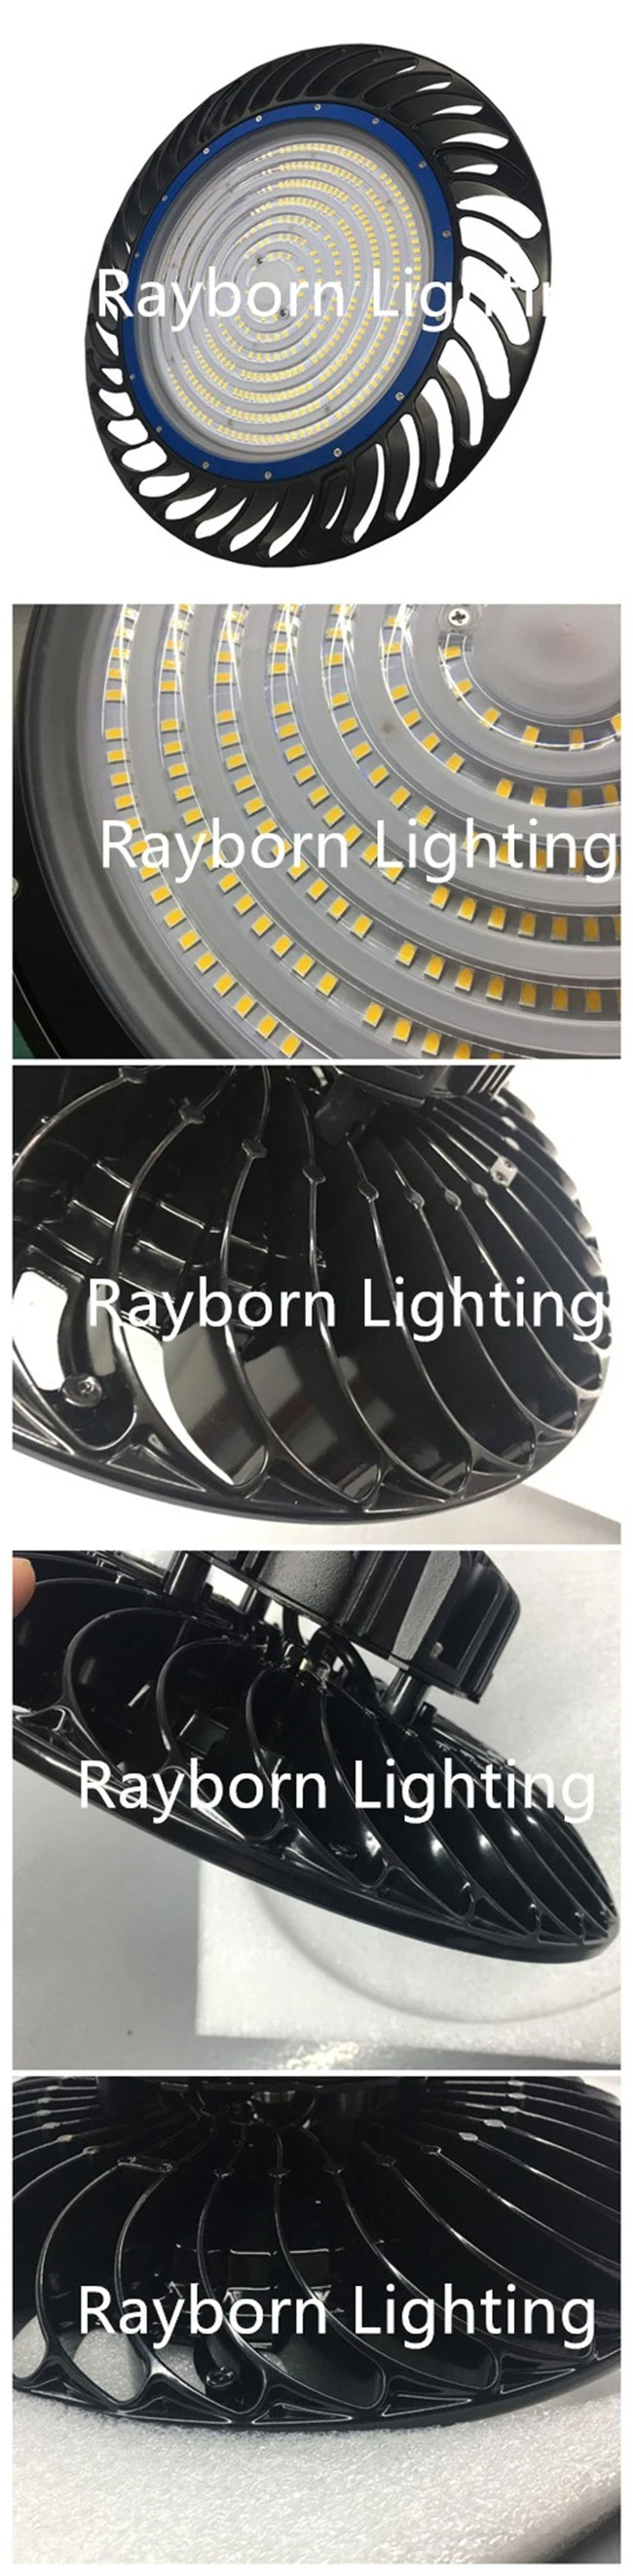 250W Industrial Lighting High Quality Mean Well Driver LED High Bay Light for Workshop Lighting